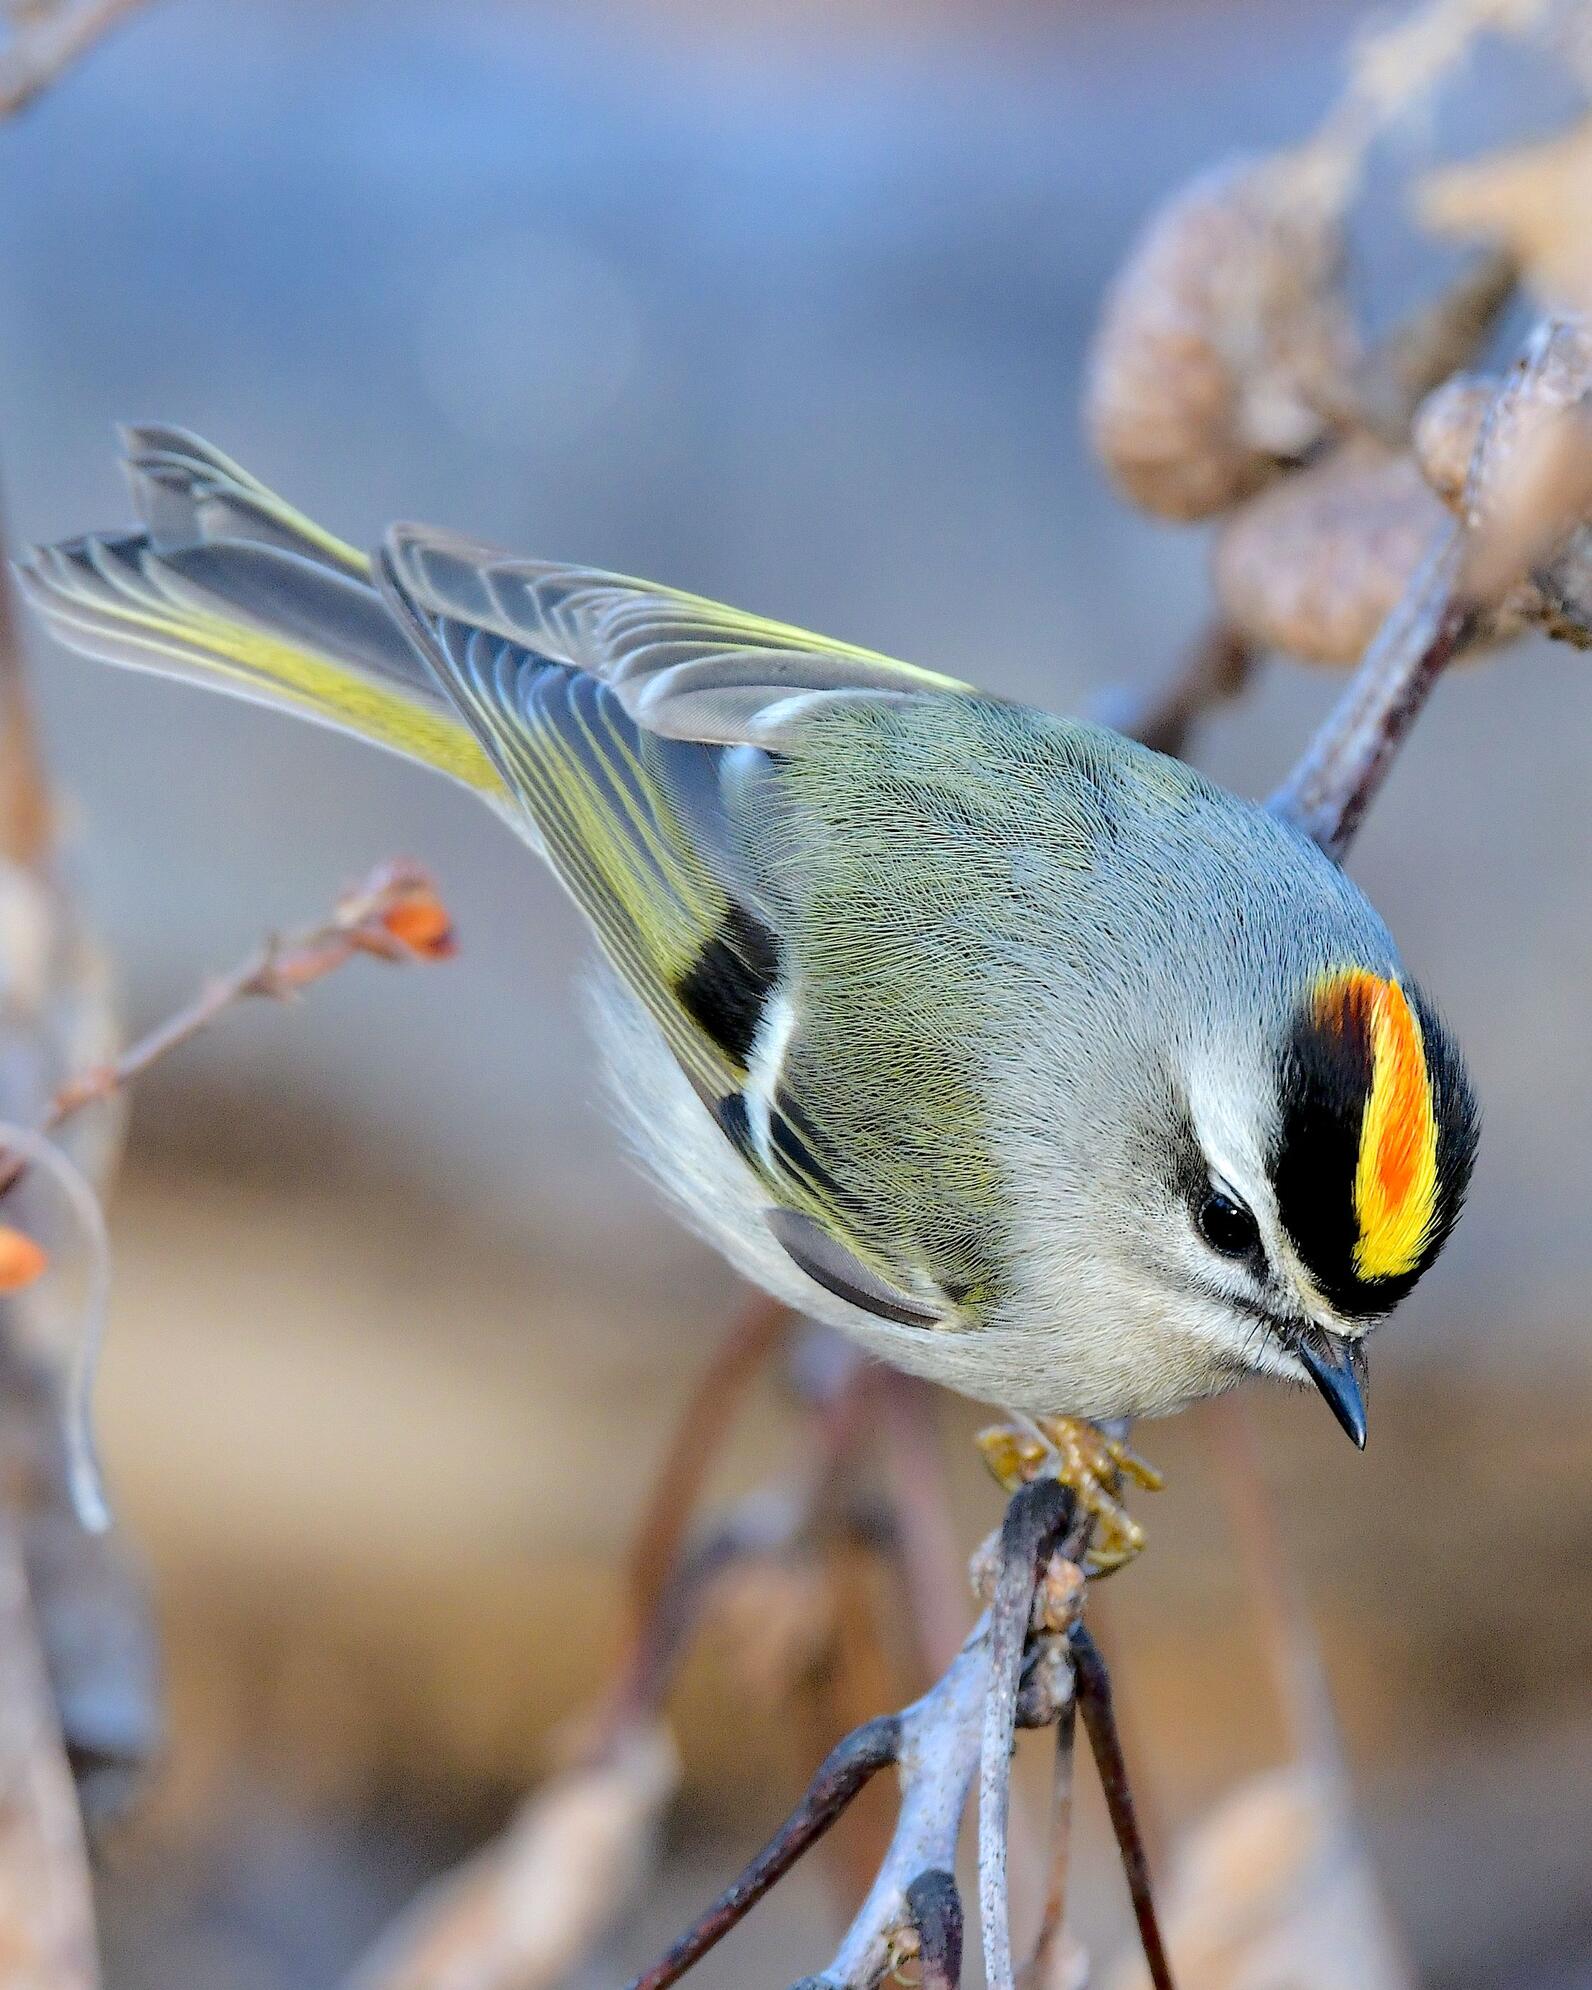 A Golden-crowned Kinglet perches on a branch and looks downward, they are known for their color rows of feathers on their head that they'll raise for social displays.